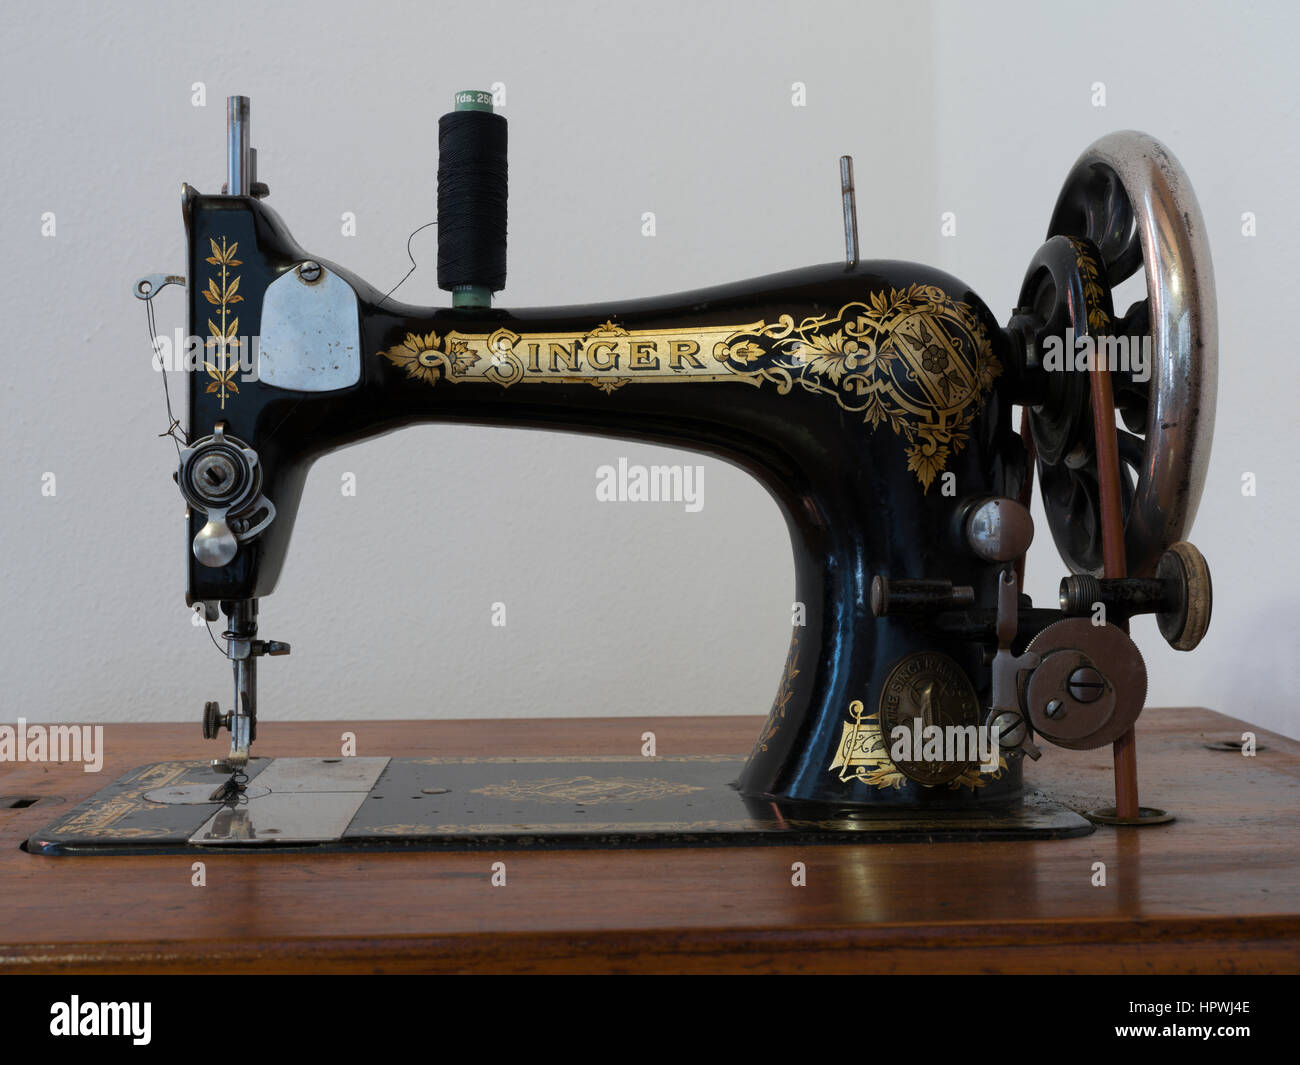 Singer 28K sewing machine, manufacted in Scotland in 1906. Stock Photo